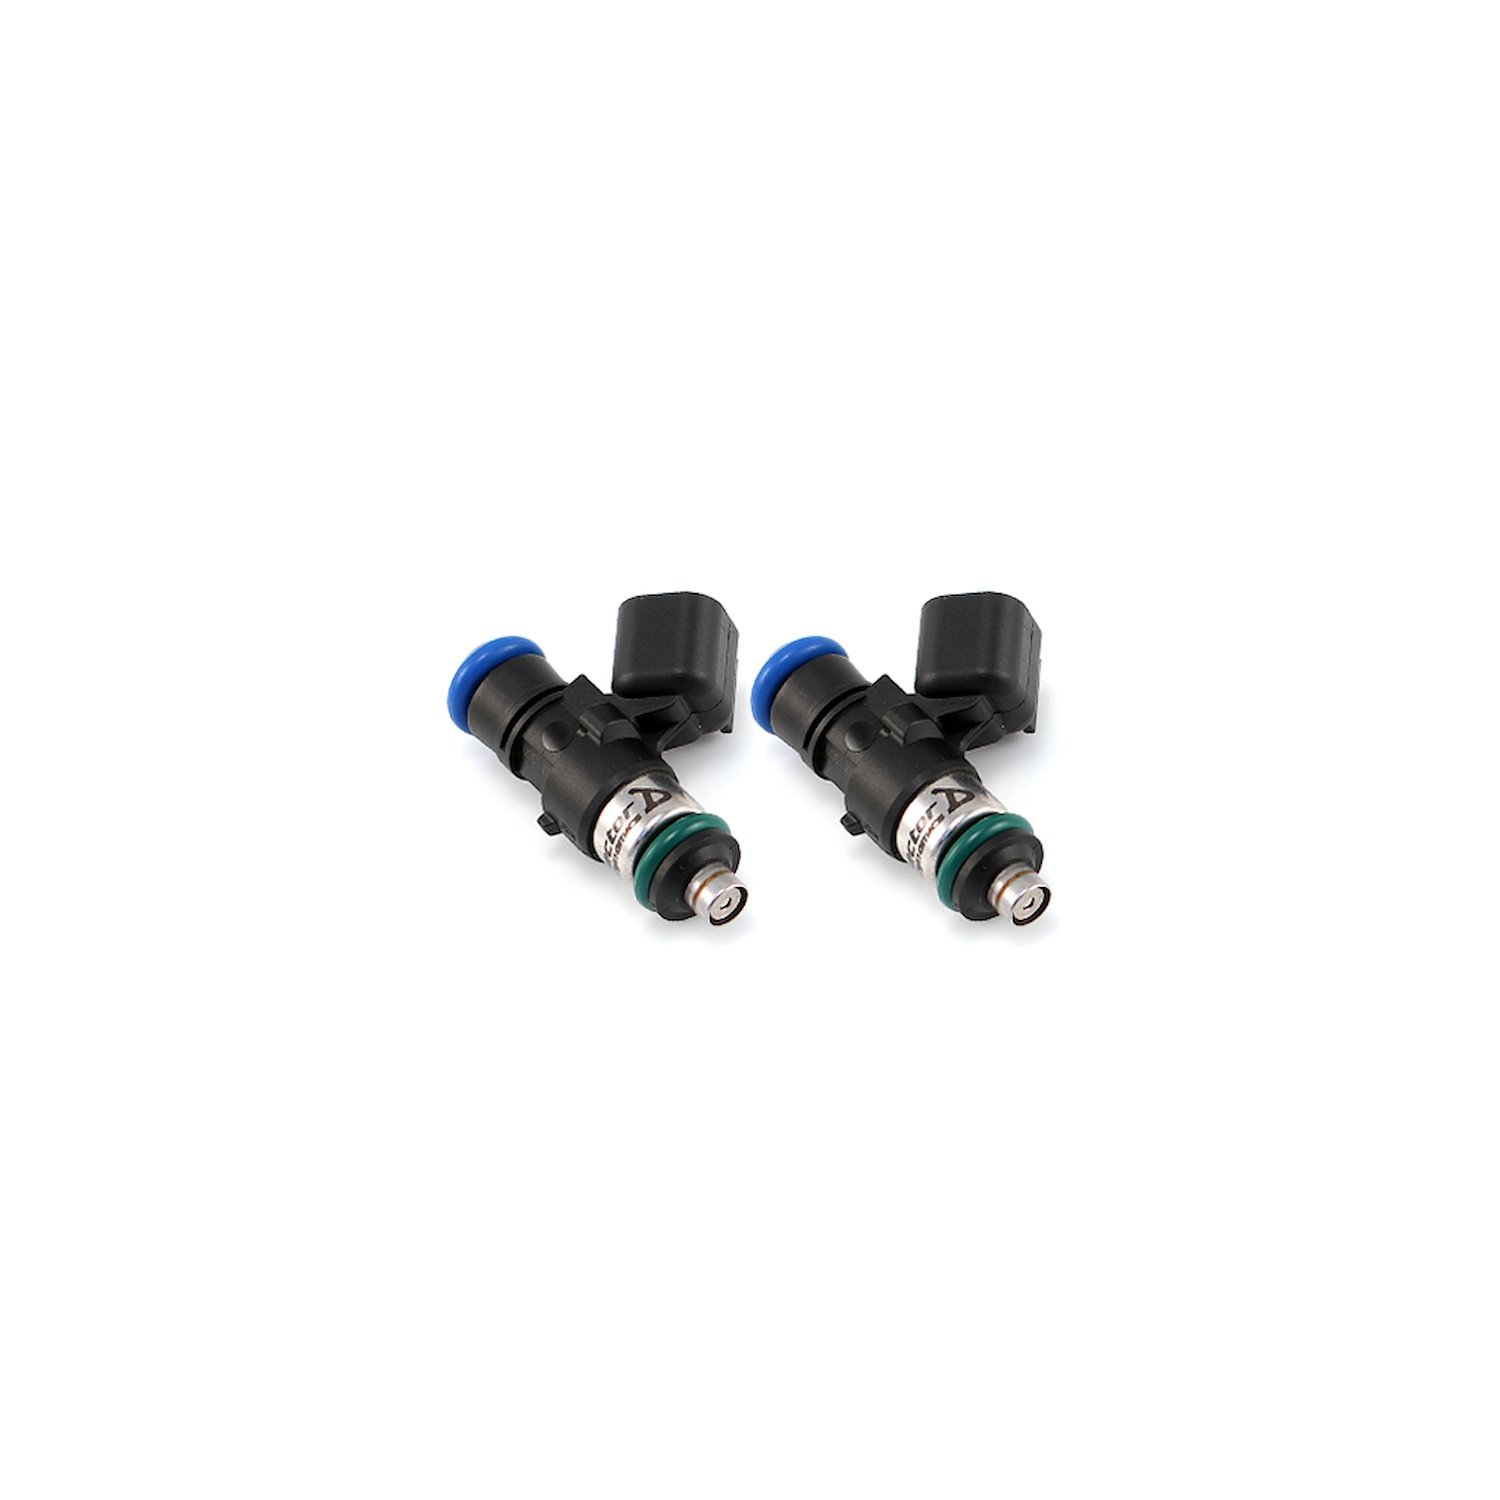 1050.34.14.14.2 1050cc Fuel Injector Set, 34 mm Length, 14 mm Top O-Ring, 14 mm Lower O-Ring